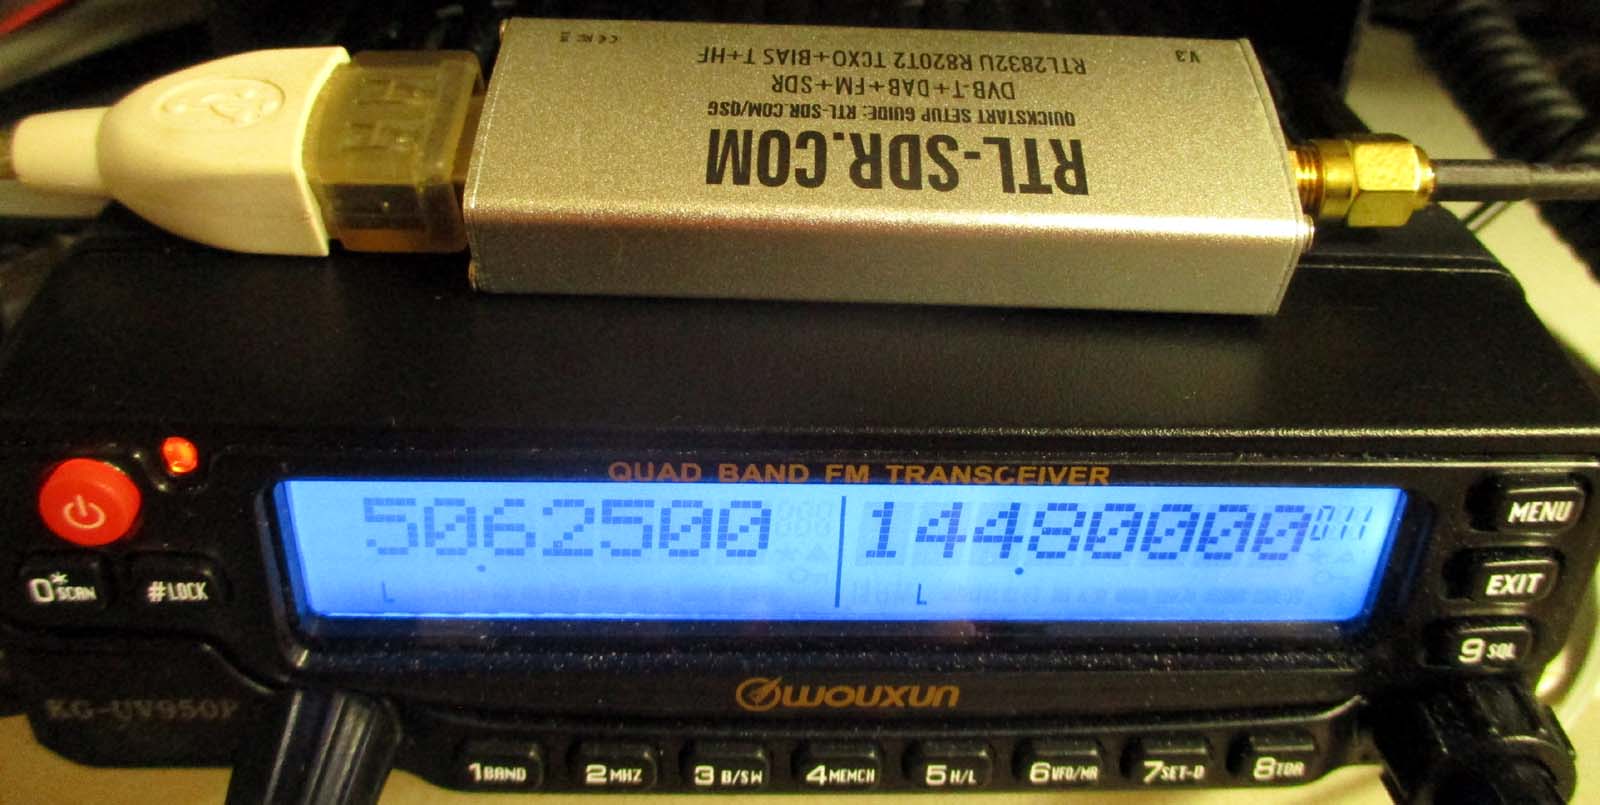 RTL-SDR connected to listen to IF of Wouxun KGUV950PL71 transceiver (c) OH7HJ.JPG